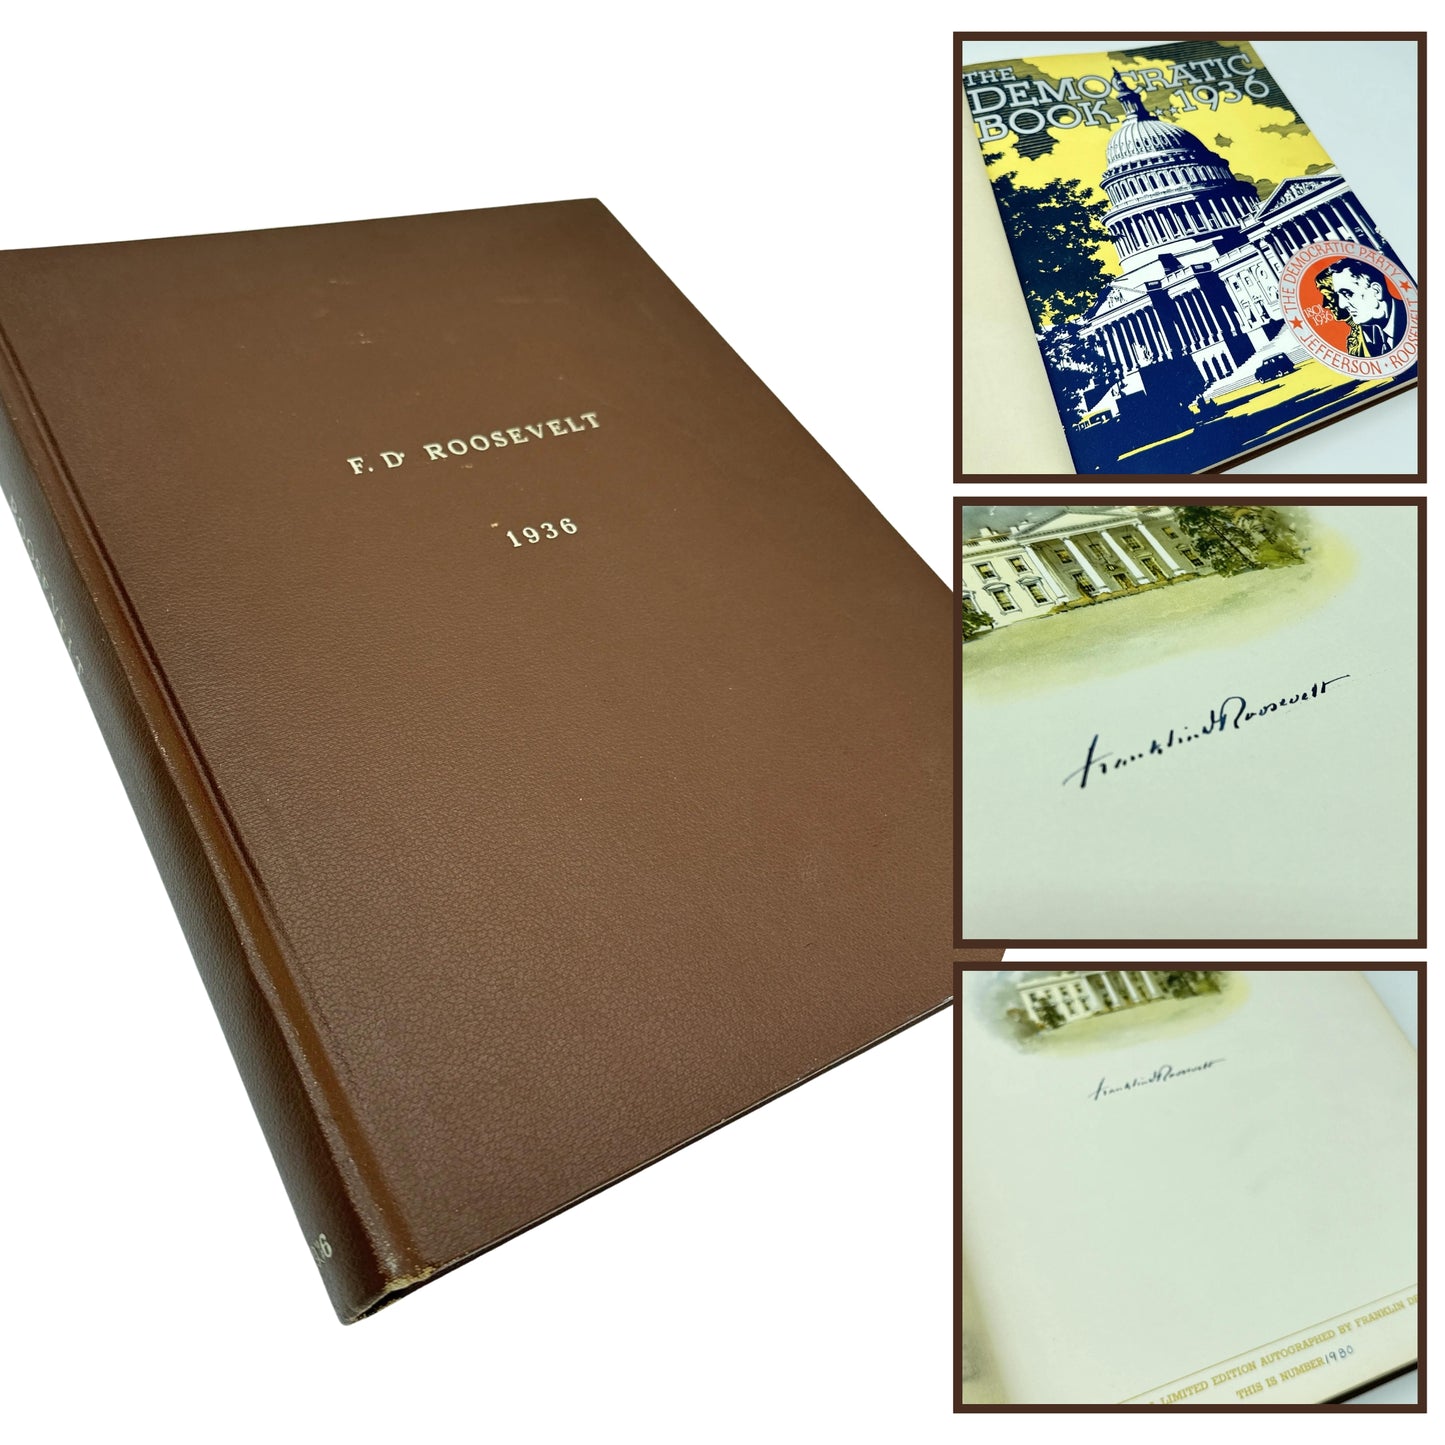 1936 The Democratic Book — Limited first edition signed by Franklin Roosevelt